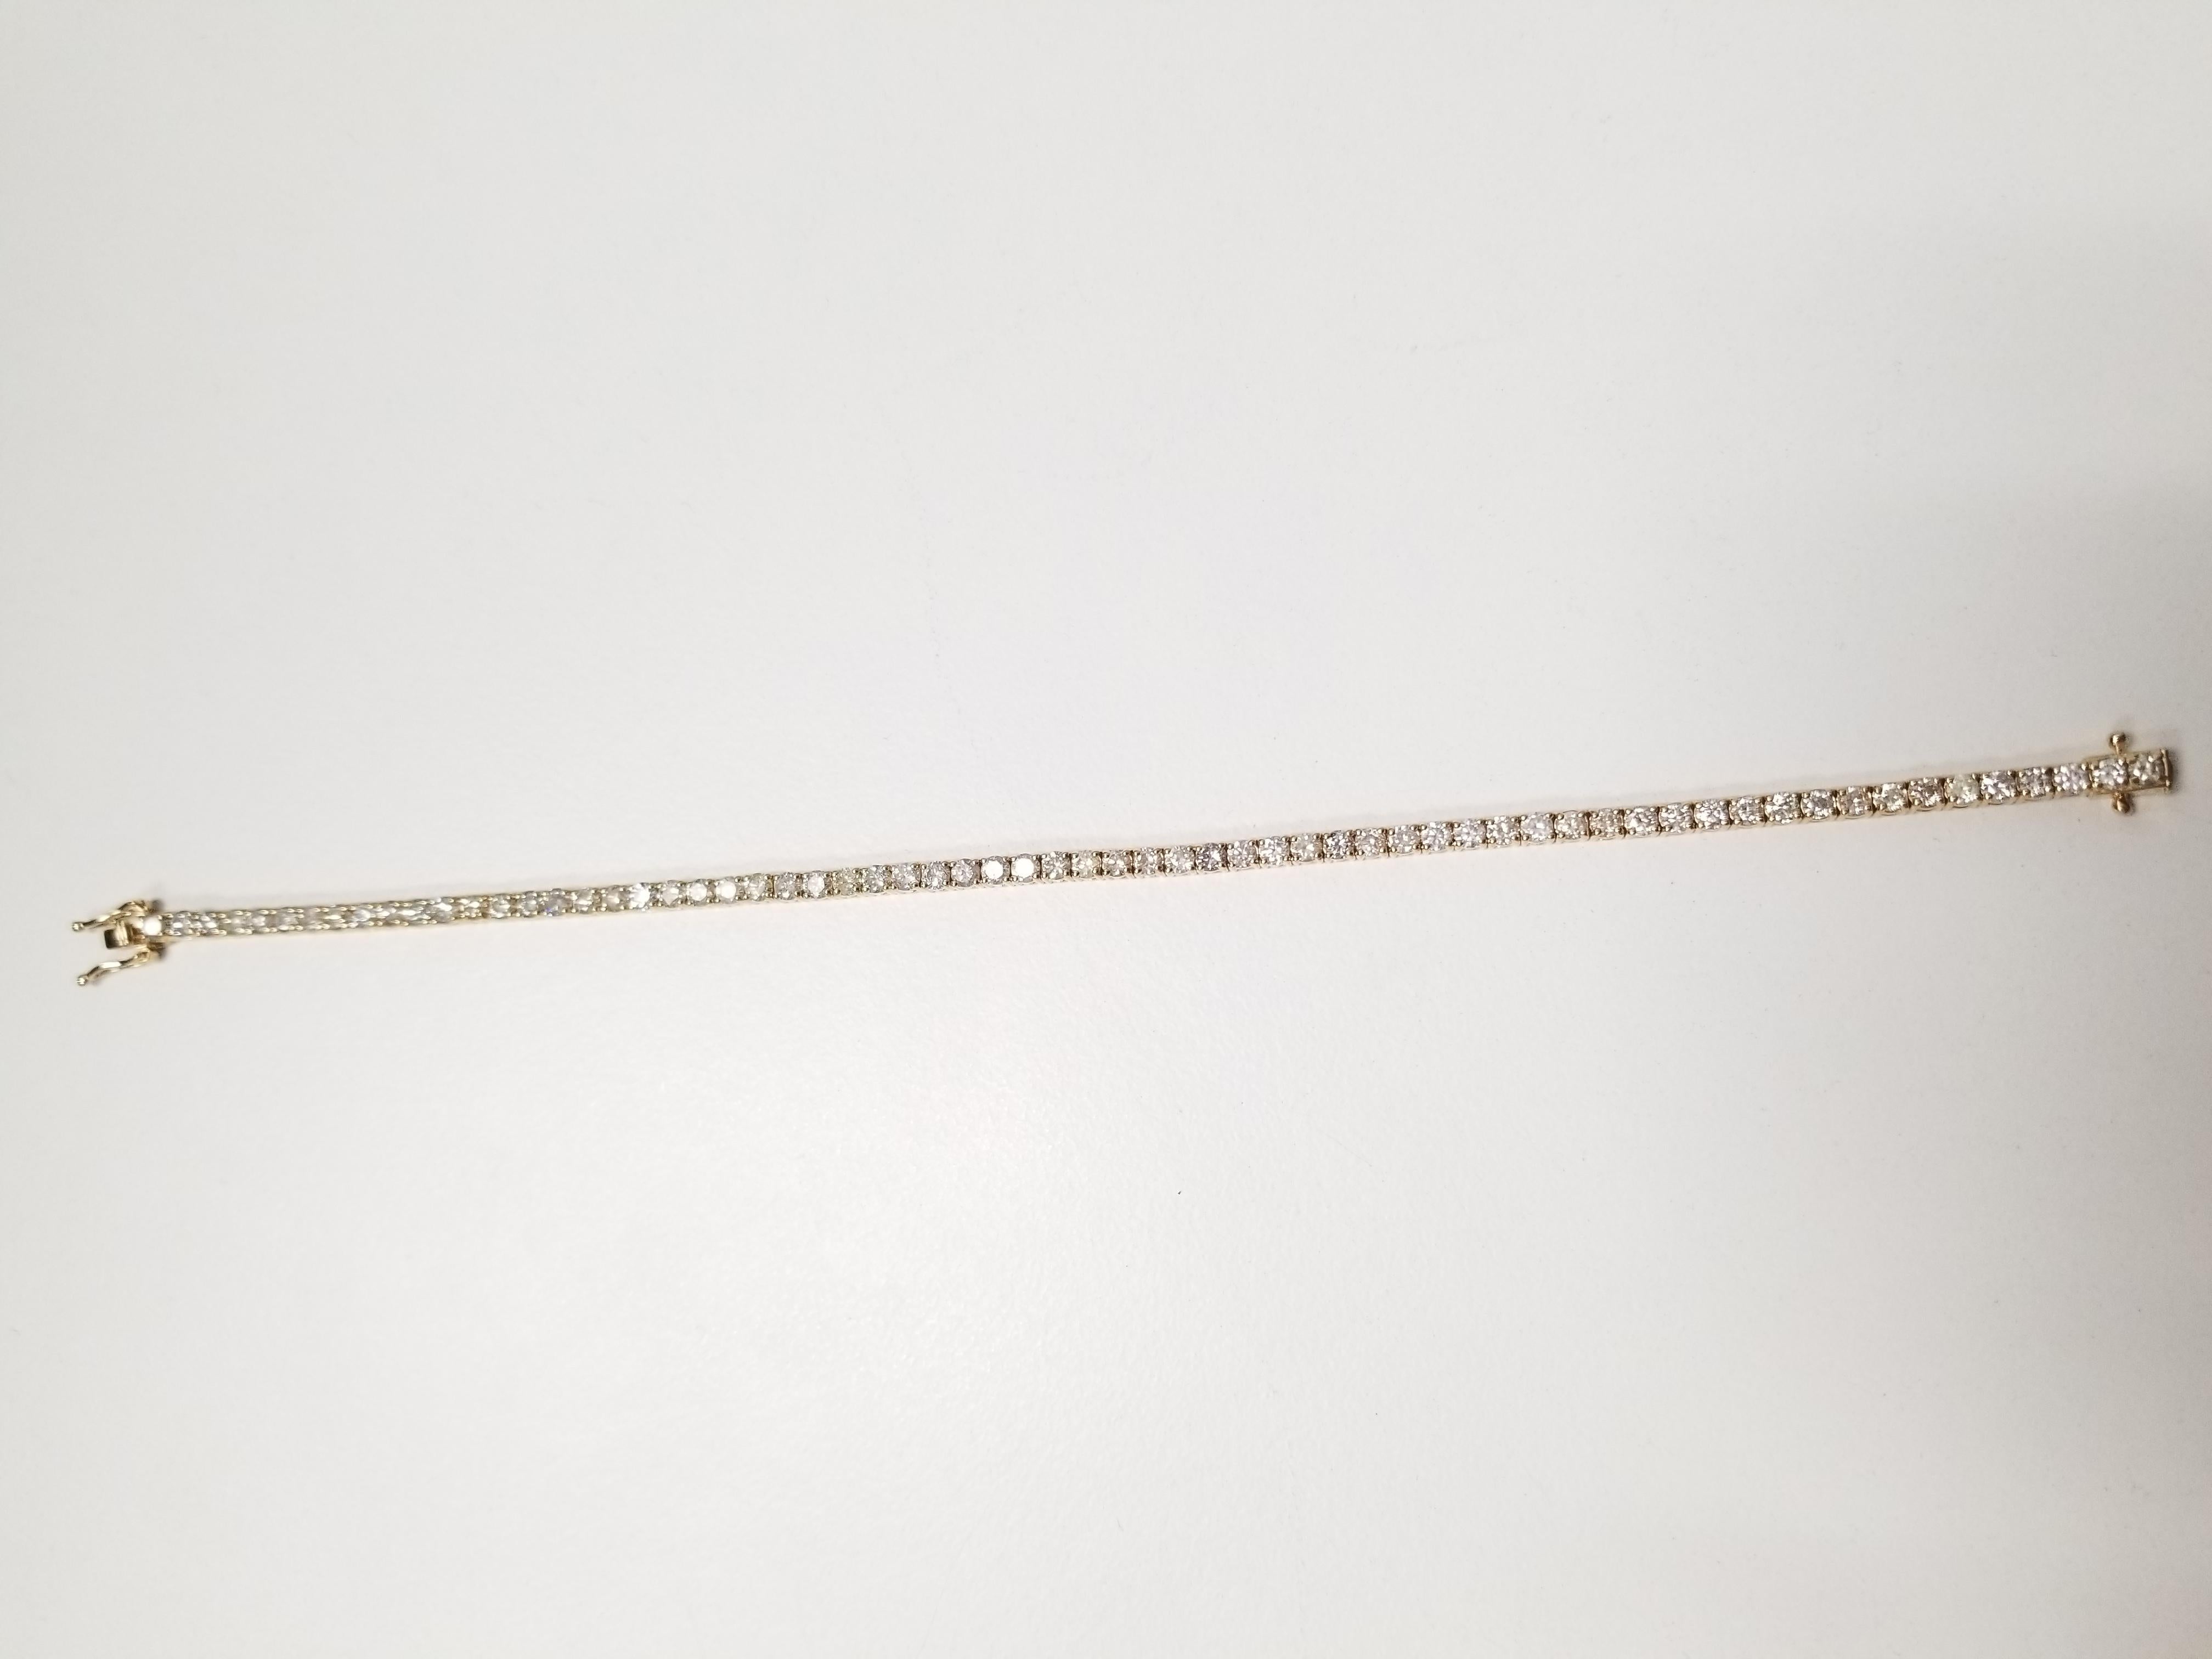 A quality tennis bracelet, containing 65 pcs of round-brilliant cut diamonds. set on 14k yellow gold. each stone is set in a classic four-prong style for maximum light brilliance. 7 inch length.